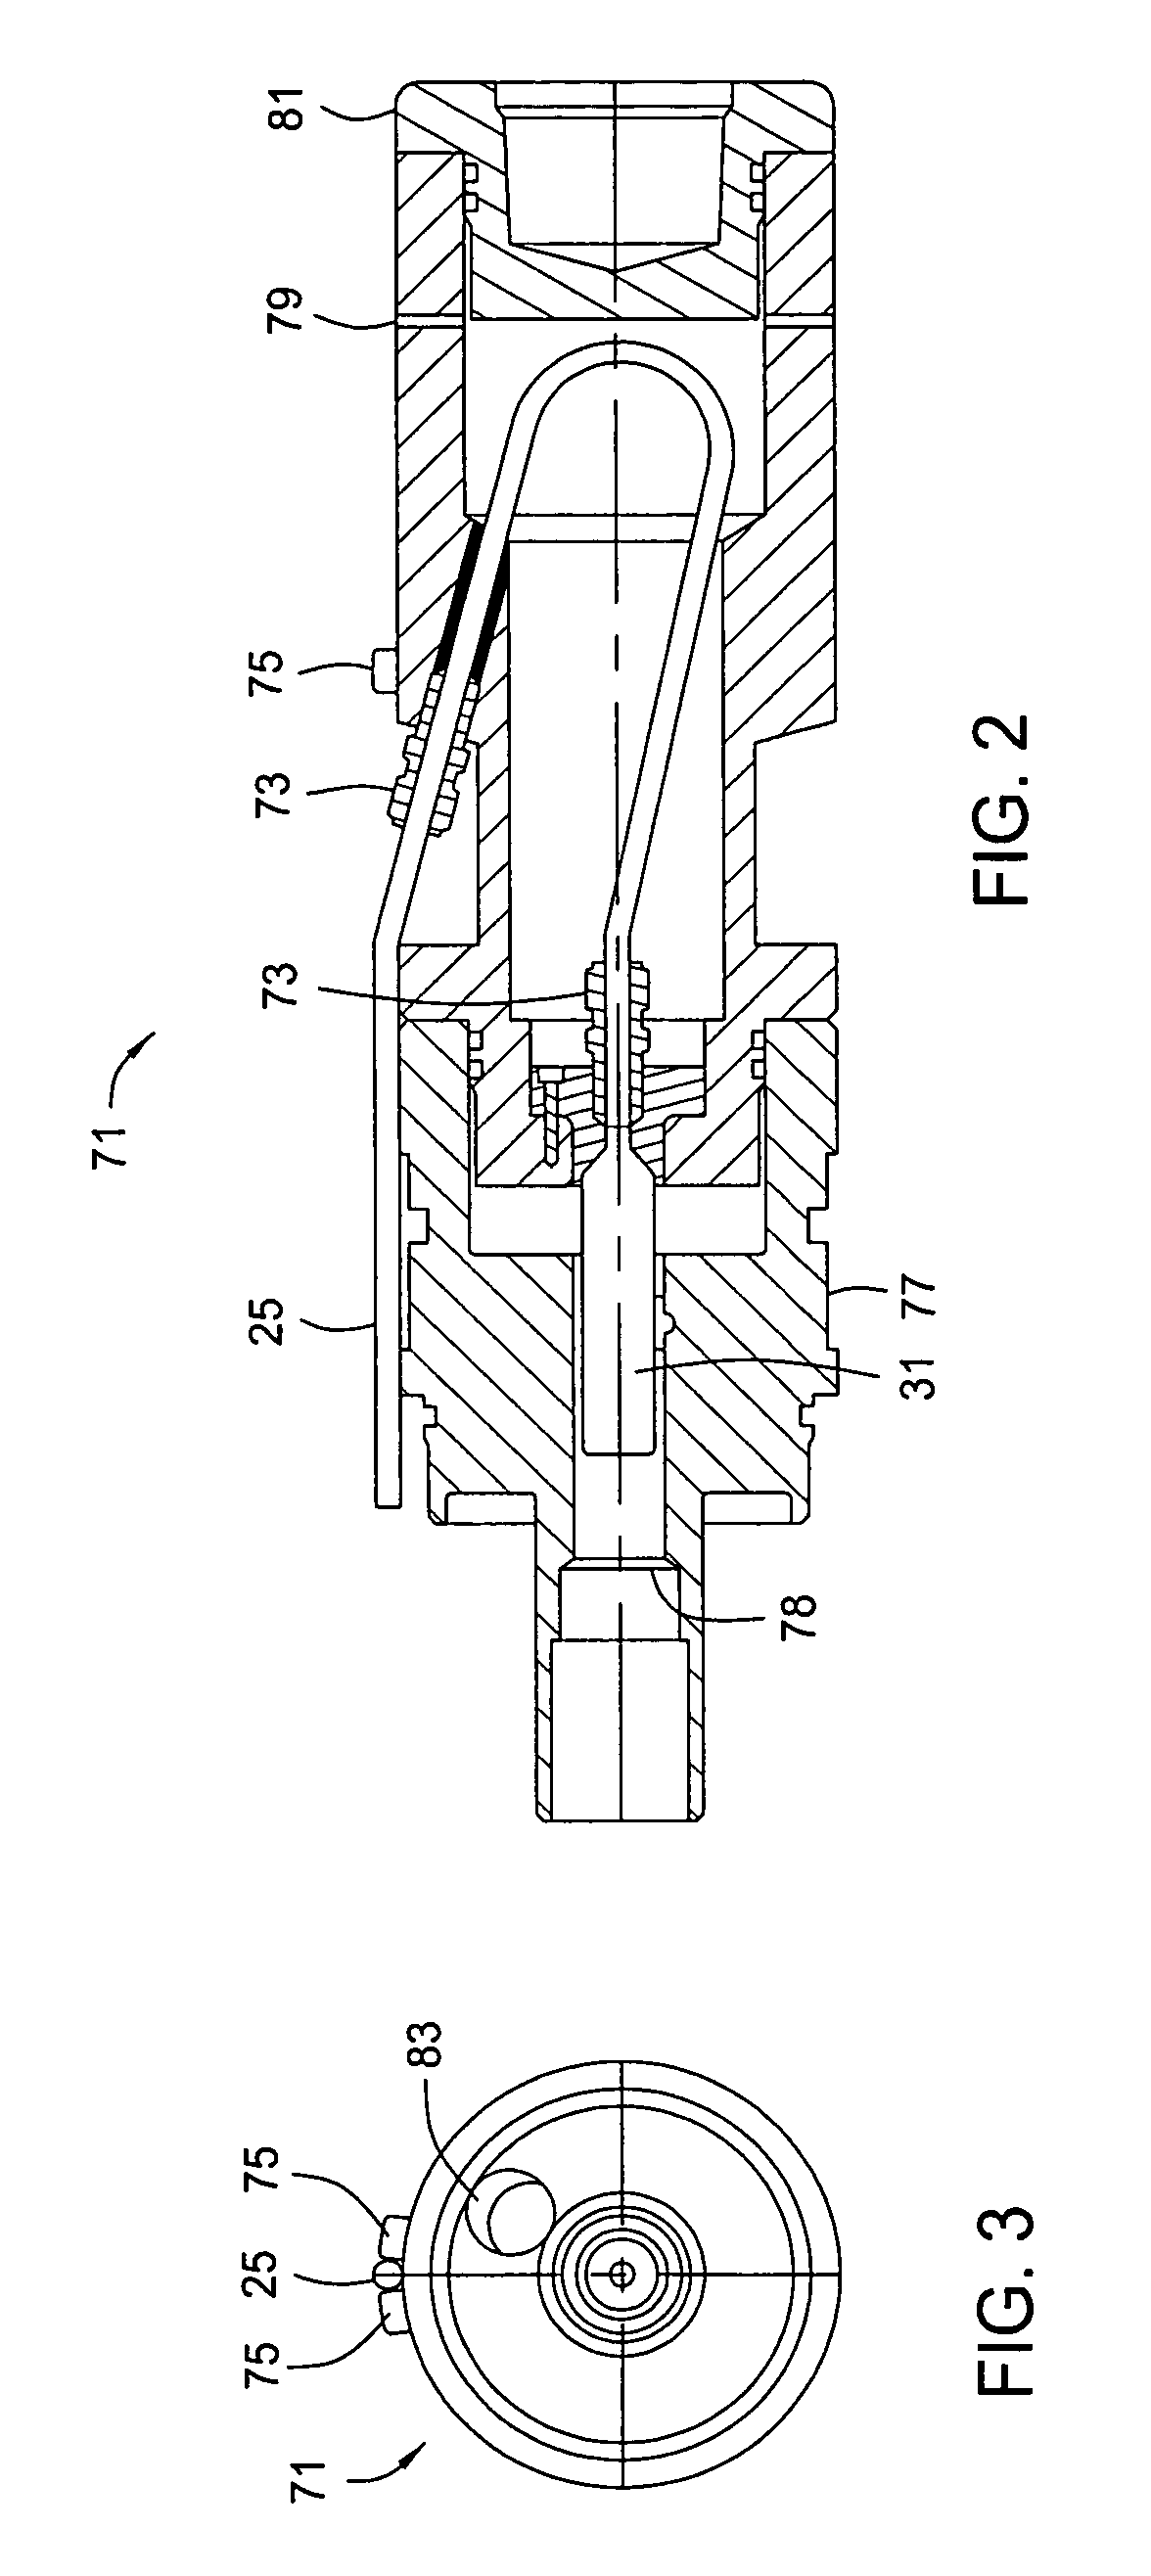 System, method, and apparatus for downhole submersible pump having fiber optic communications